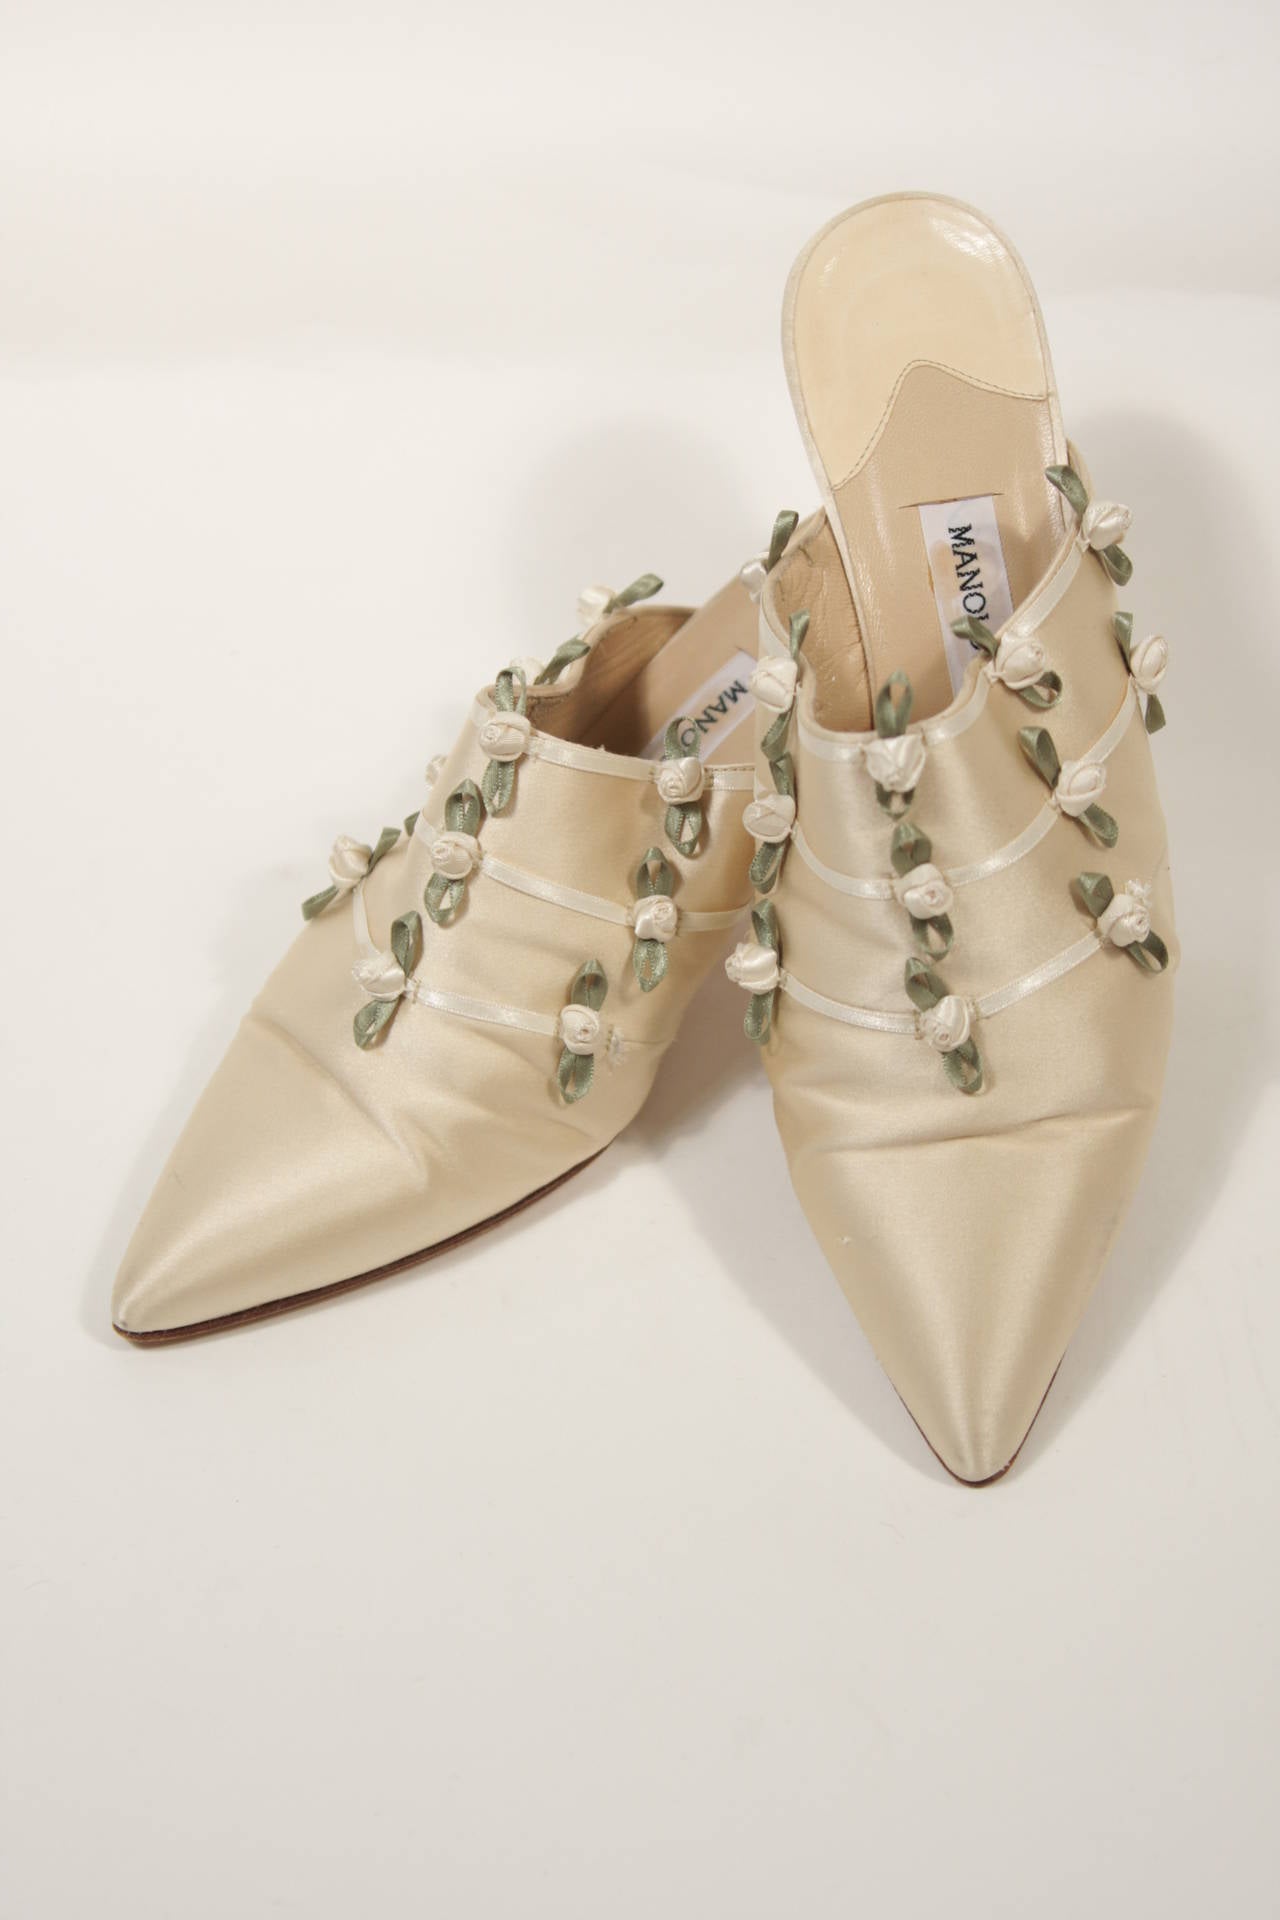 Beige Manolo Blahnik Ivory Silk Bridal Shoe with Floral Accents Size 7